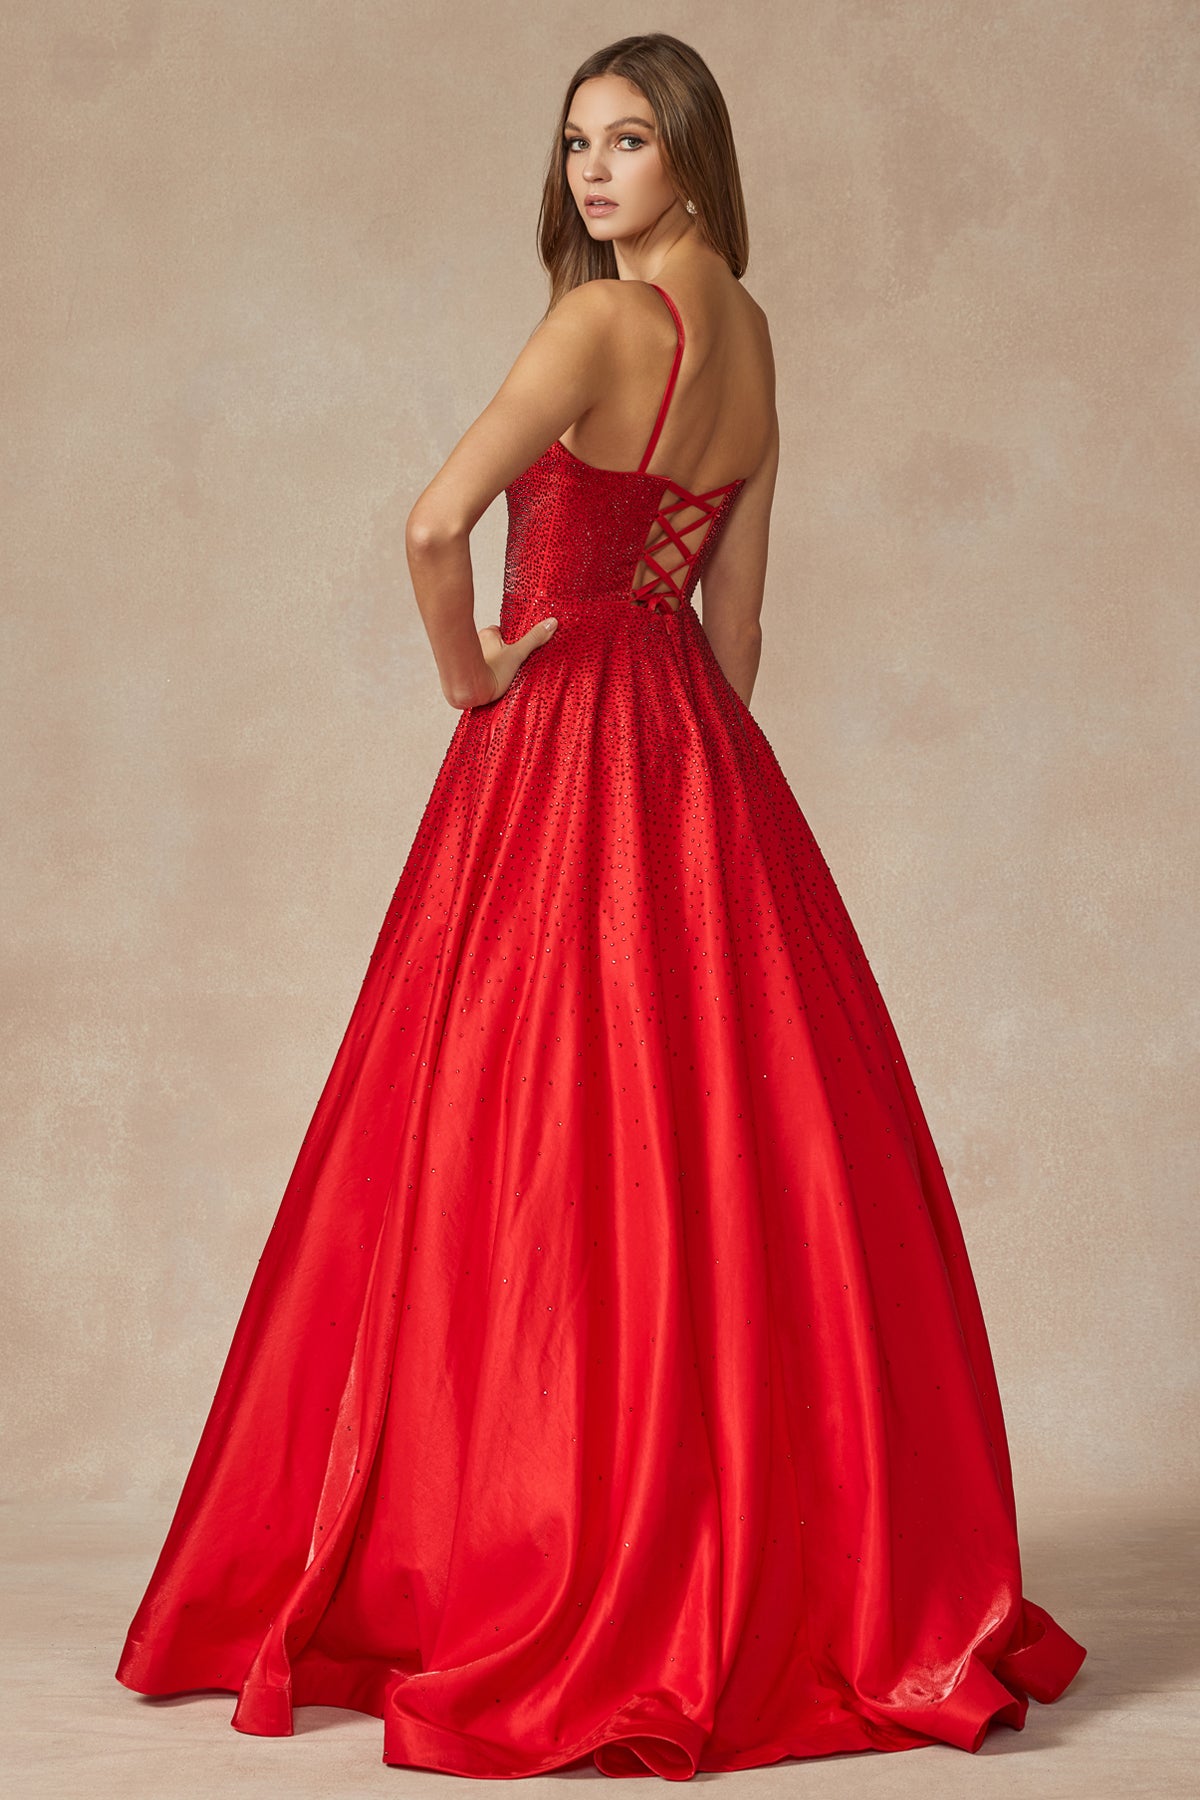 Back of red prom gown with stone accents